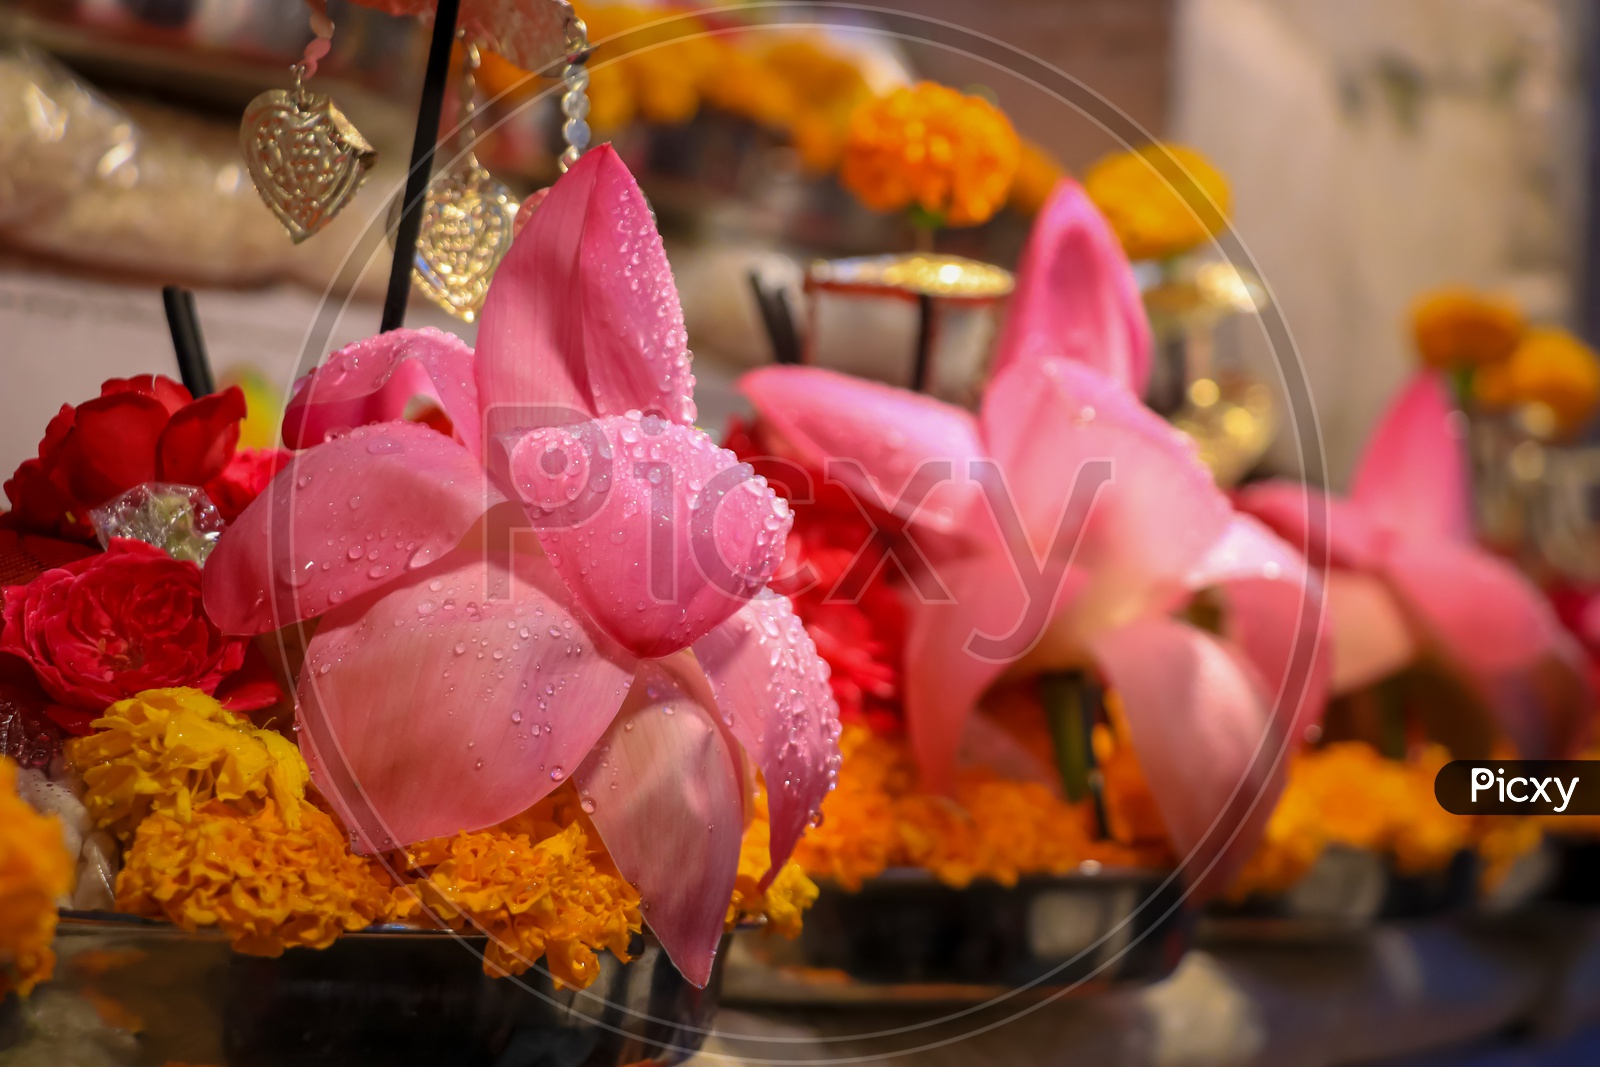 Fresh Lotus and various flowers being sold at a shop